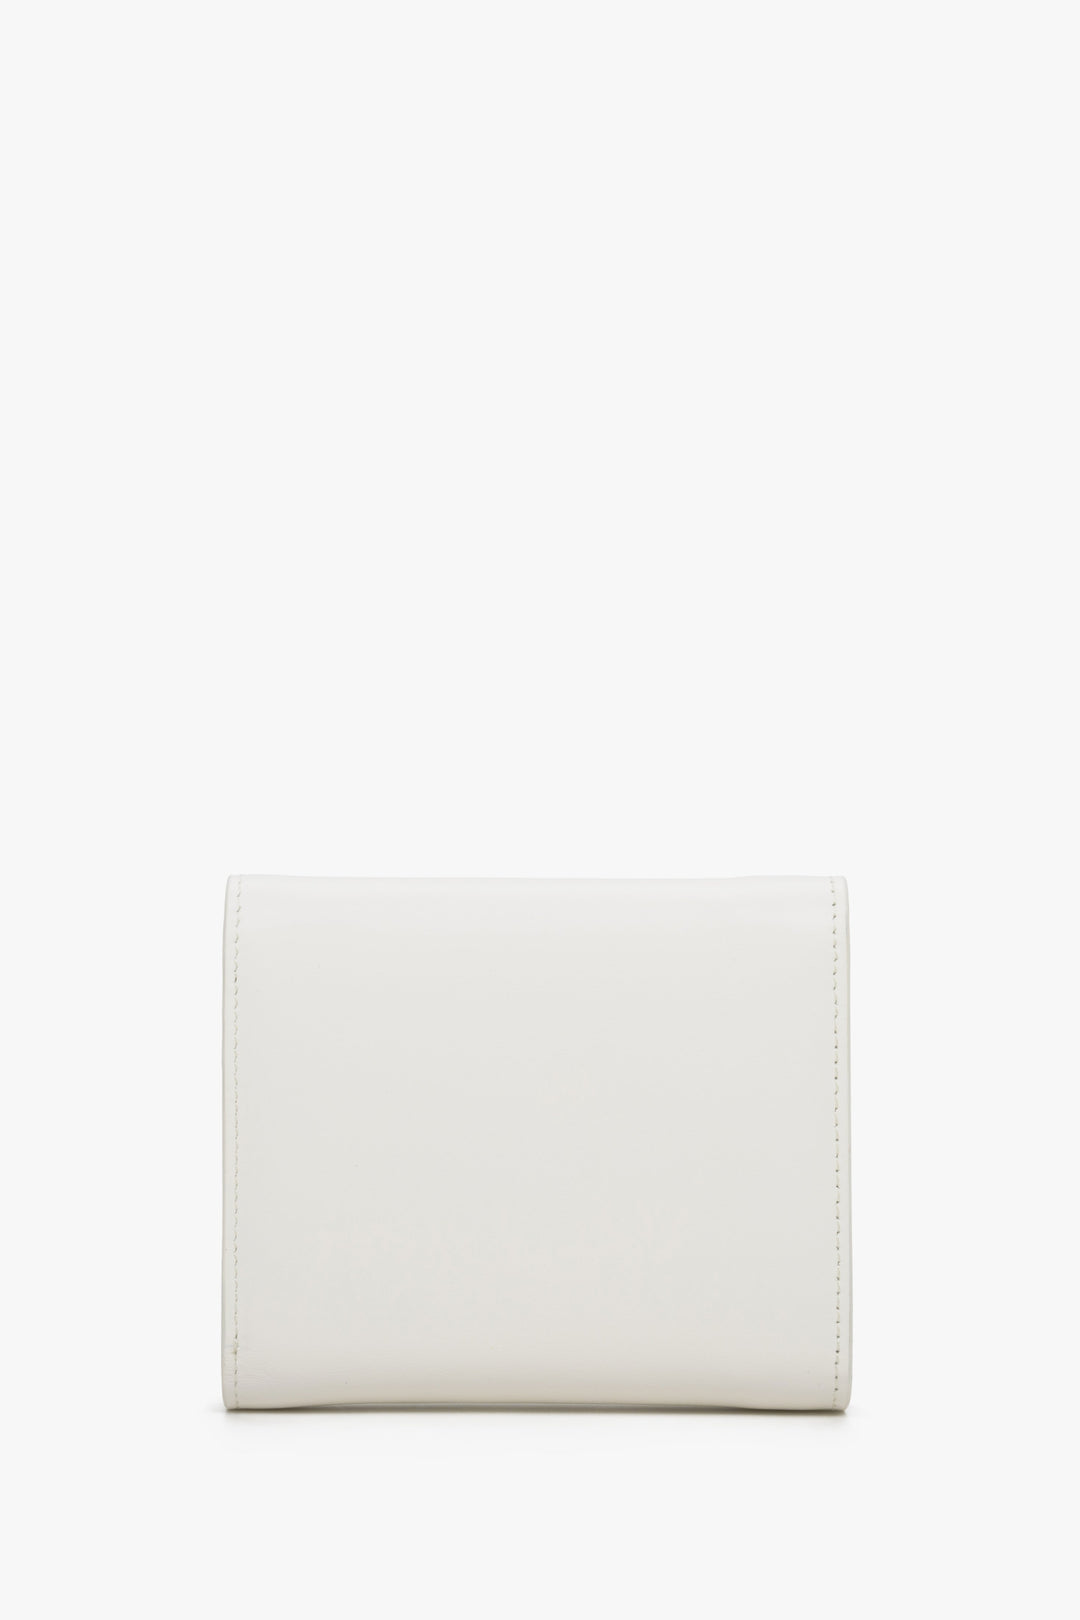 The back of the small light beige women's wallet by Estro.